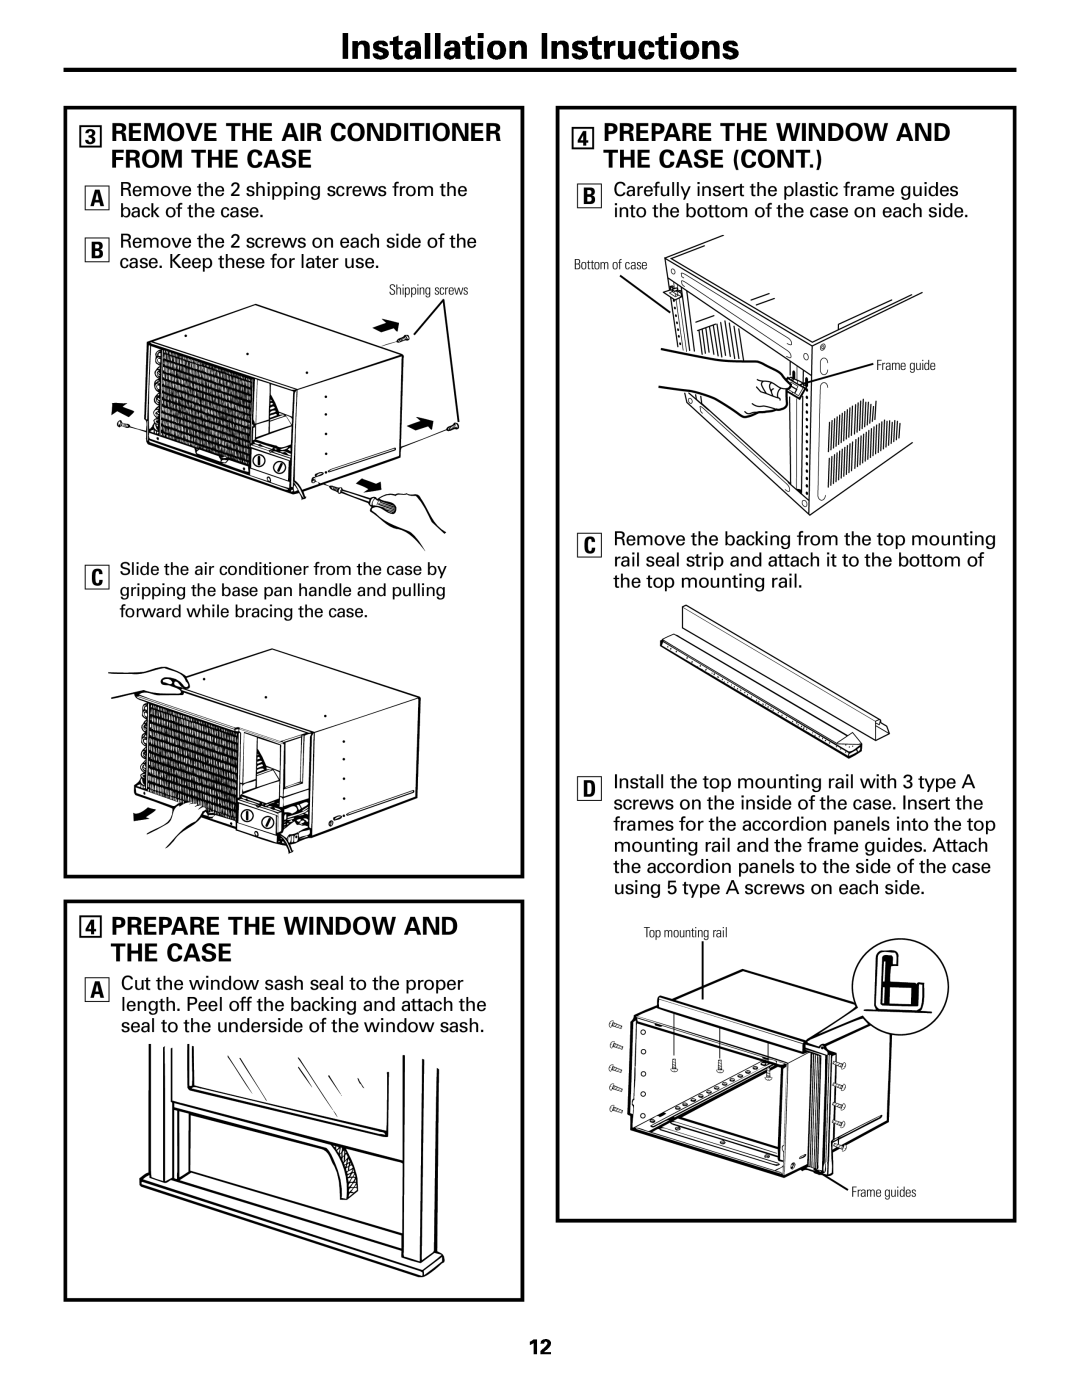 GE AGW24, AGQ24 3REMOVE THE AIR CONDITIONER FROM THE CASE, 4PREPARE THE WINDOW AND THE CASE, Installation Instructions 